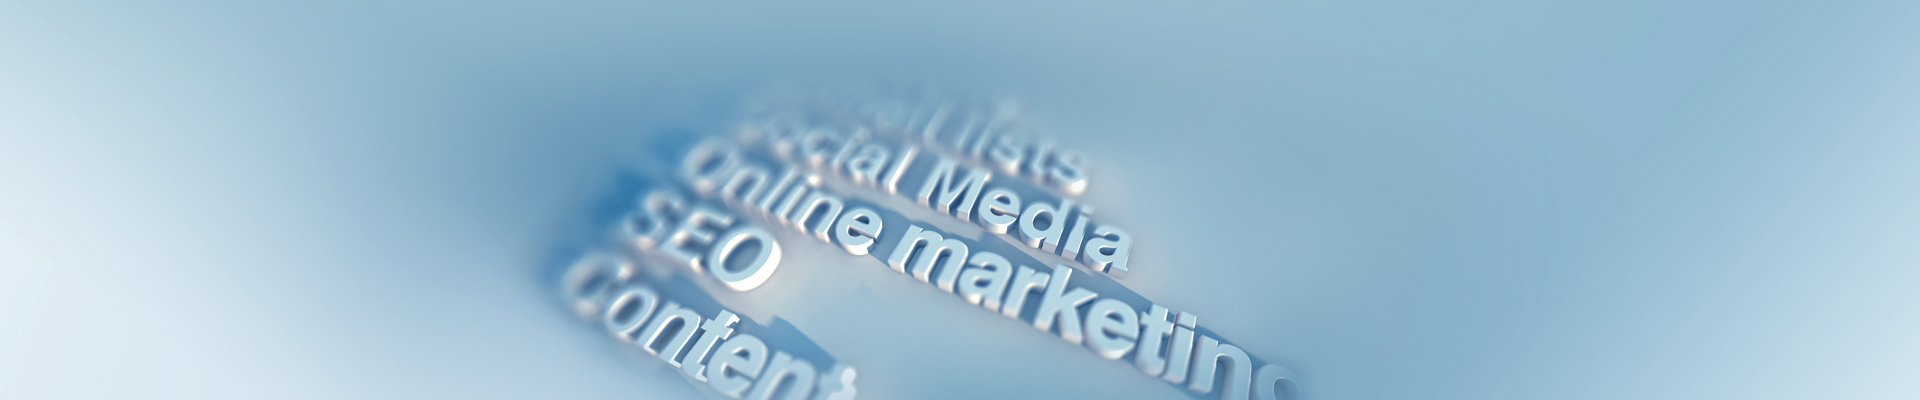 SEO, Social Media and Online marketing services depicted by letters on a white background